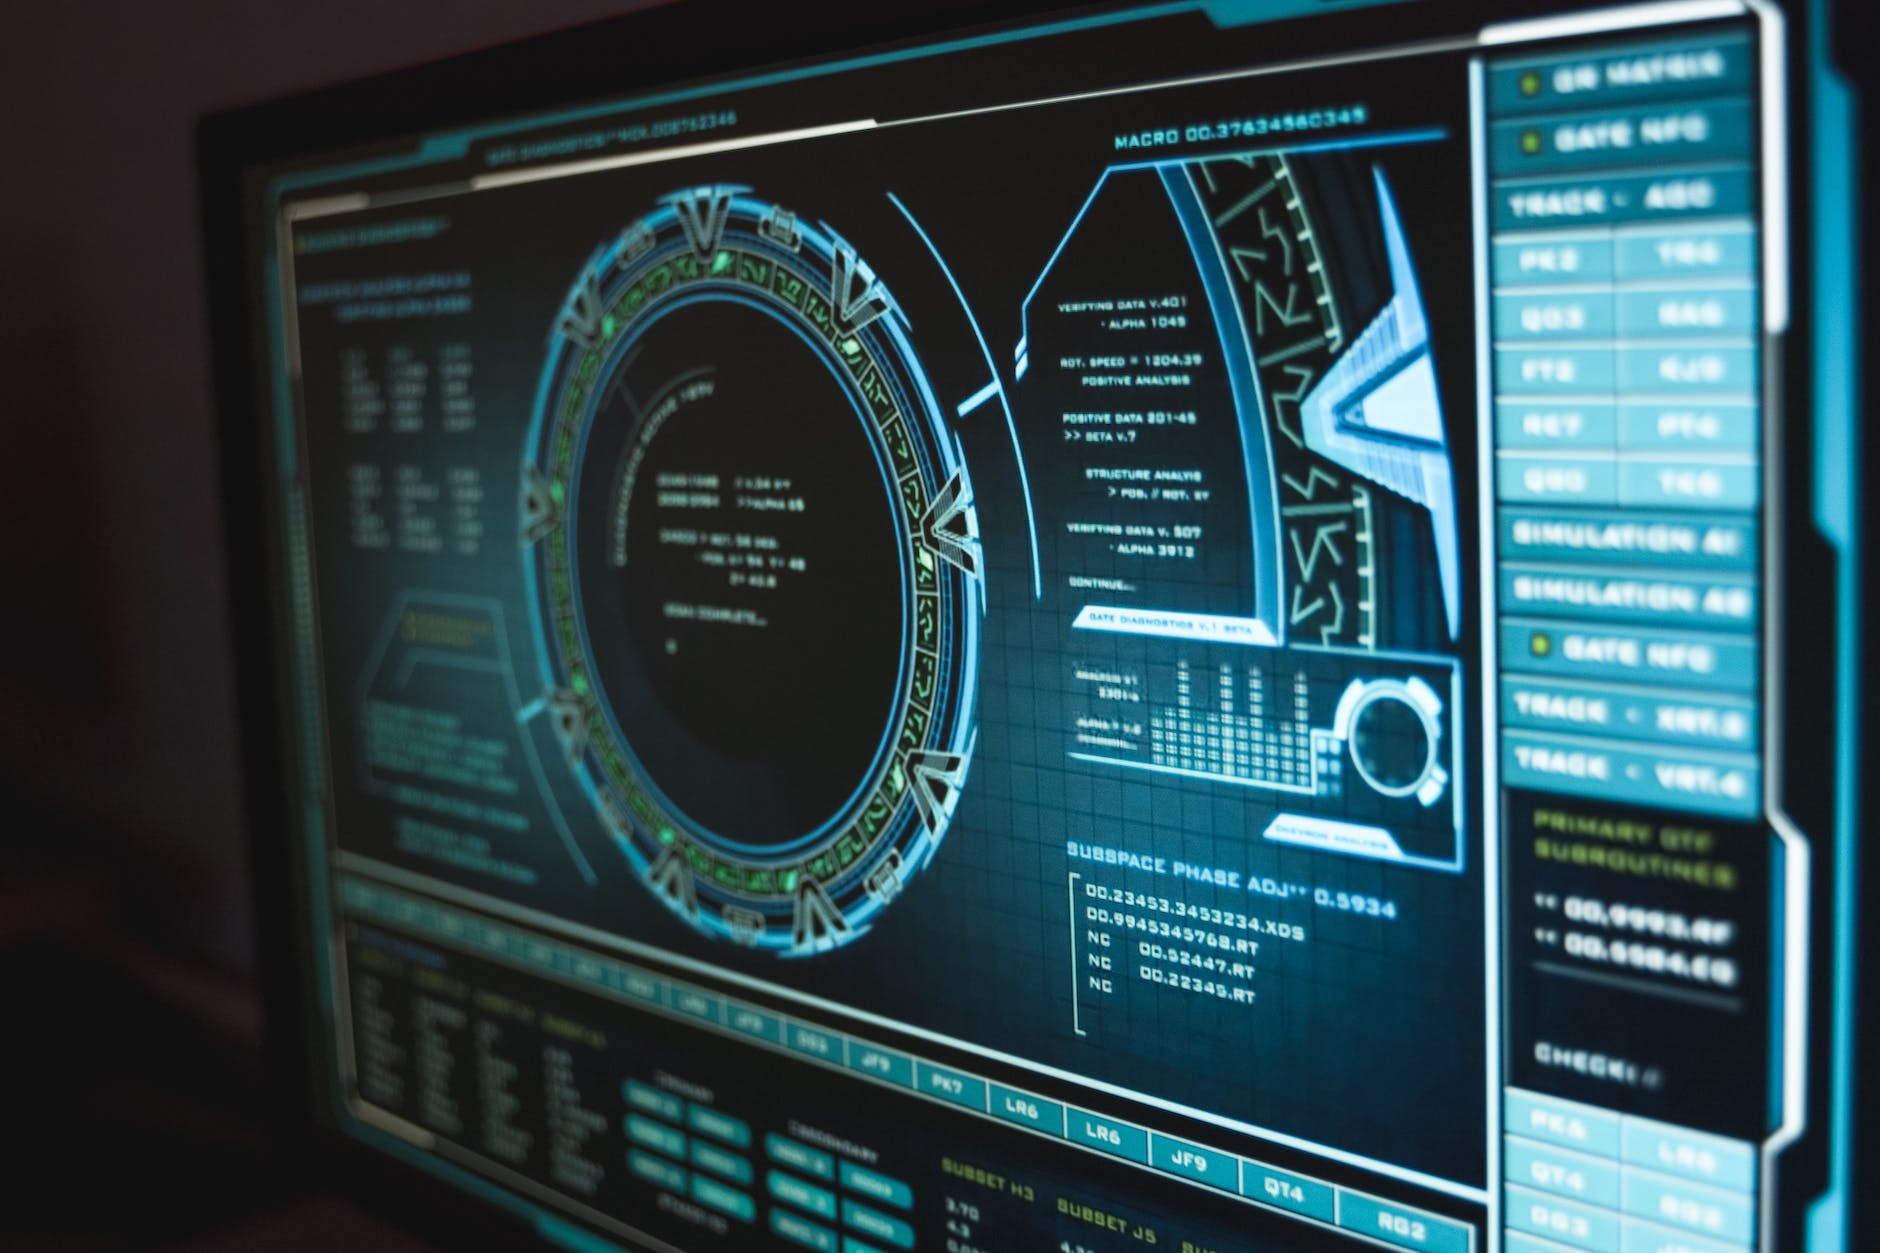 Immersive depiction of a cybersecurity report with sci-fi elements, emphasizing our state-of-the-art technology and futuristic approach to digital security